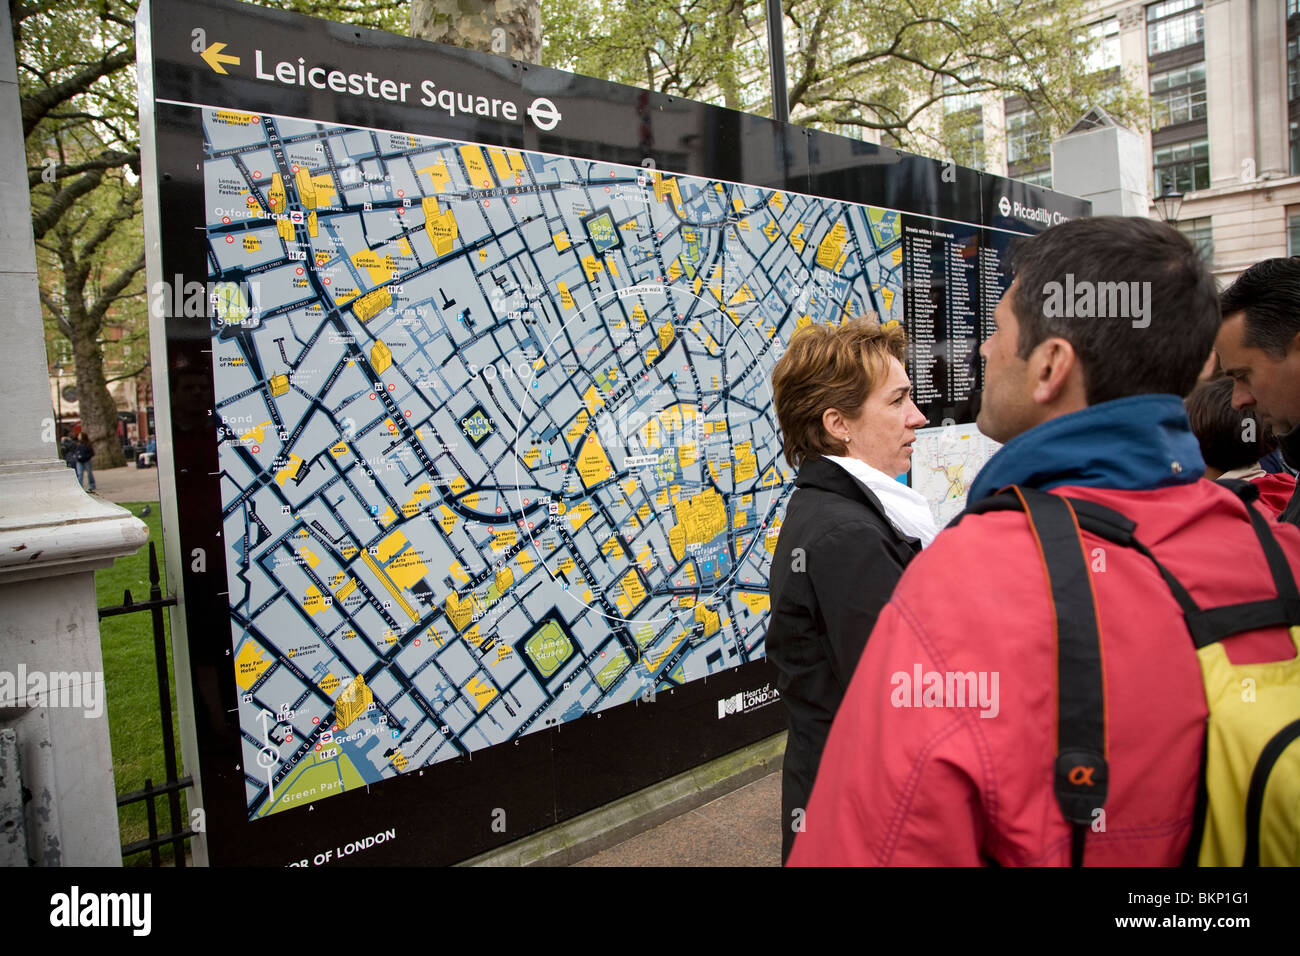 Large location map for tourists, Leicester Square, London, England Stock Photo